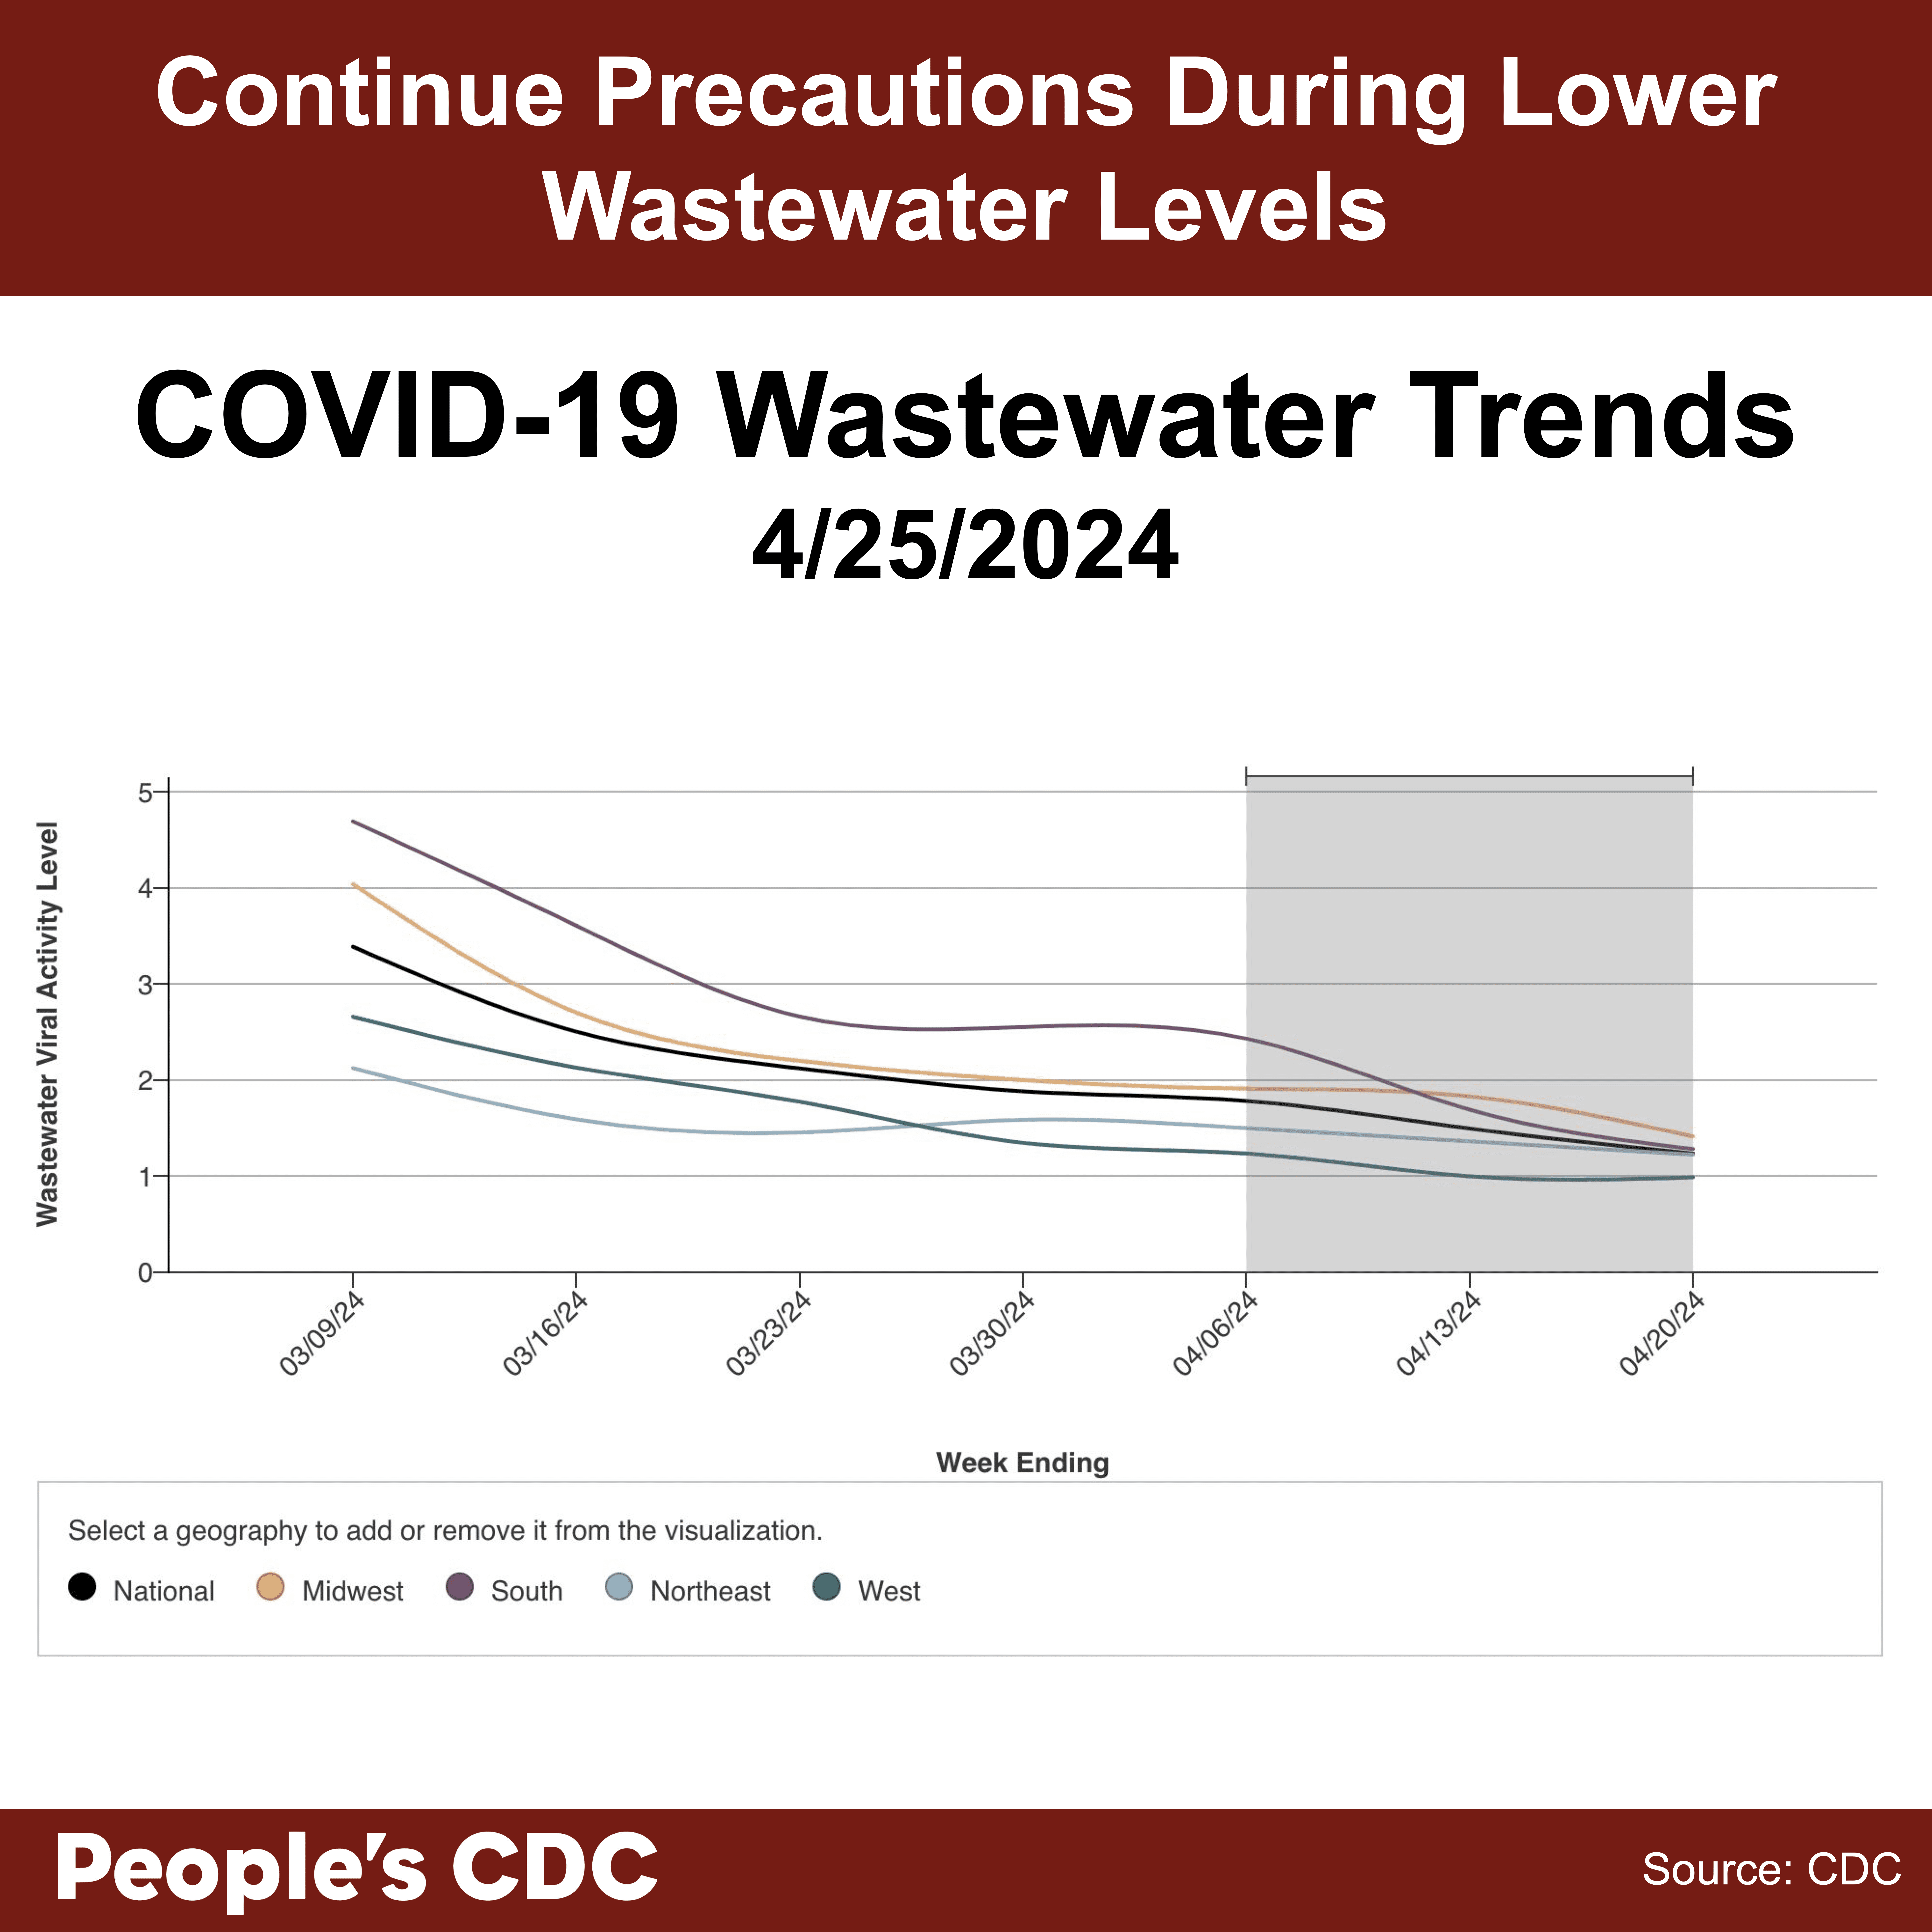 A line graph with the title, “COVID-19 Wastewater Trends 4/25/2024” with “Wastewater Viral Activity Level” indicated on the left-hand vertical axis, going from 0-5, and “Week Ending” across the horizontal axis, with date labels ranging from 3/9/24 to 4/06/24, with the graph extending through 4/20/24. A key at the bottom indicates line colors. National is black, Midwest is orange, South is purple, Northeast is light blue, and West is green. Overall, levels have trended downward since last month. Within the gray-shaded provisional data provided for the last 2 weeks, all geographical regions are trending downward. Text above the graph reads “Continue Precautions During Lower Wastewater Levels. Text below: People’s CDC. Source: CDC.” Graphic source: CDC